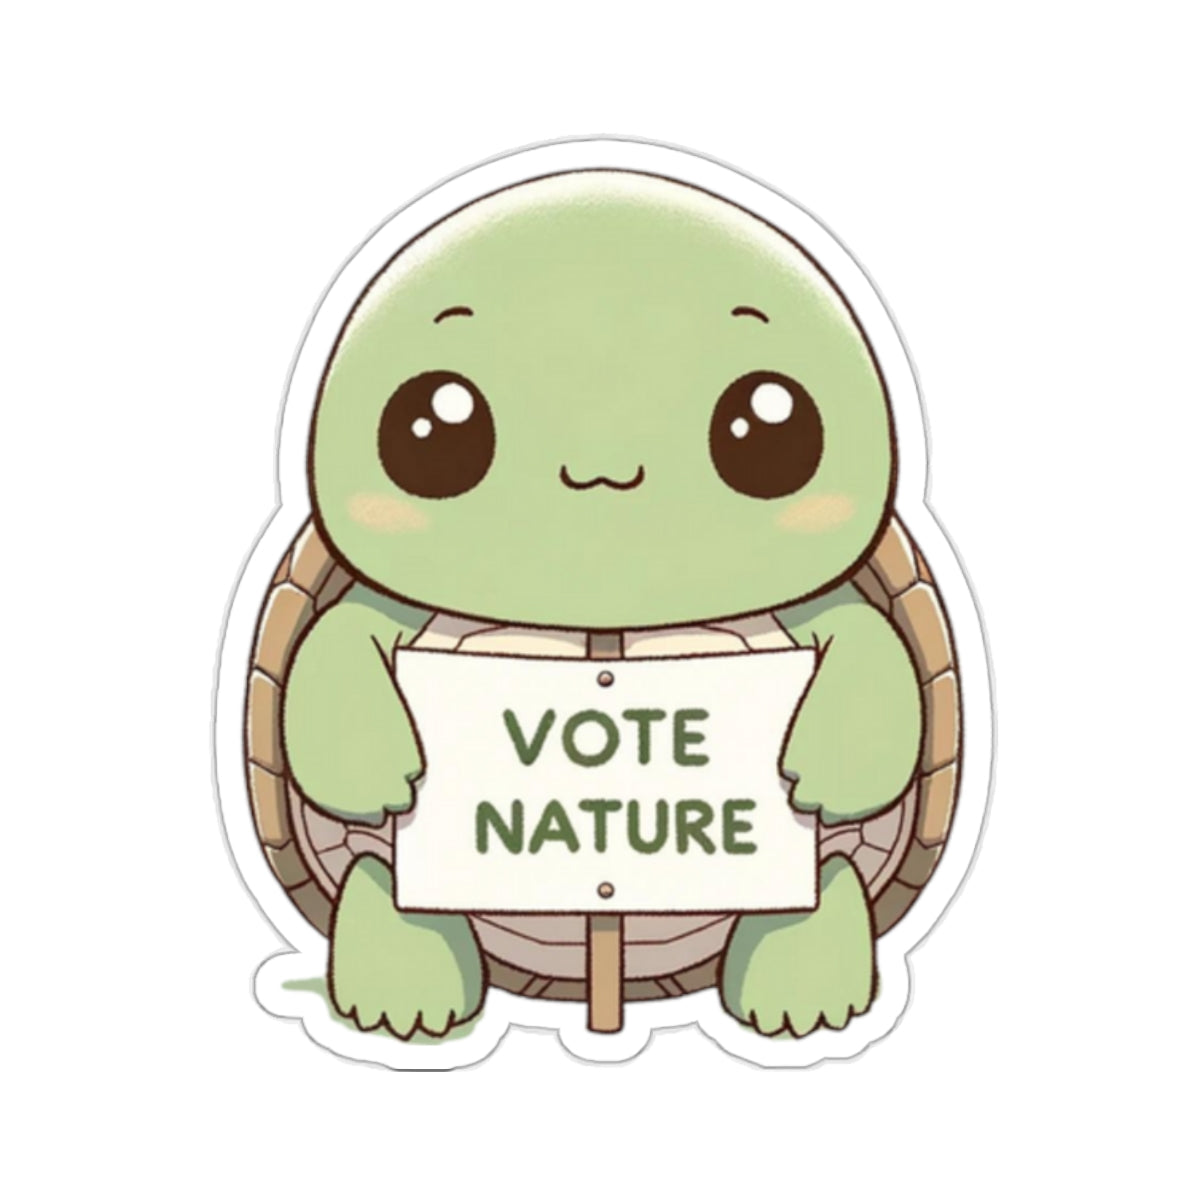 Inspirational Cute Turtle Statement vinyl Sticker: Vote Nature! for laptop, kindle, phone, ipad, instrument case, notebook, mood board